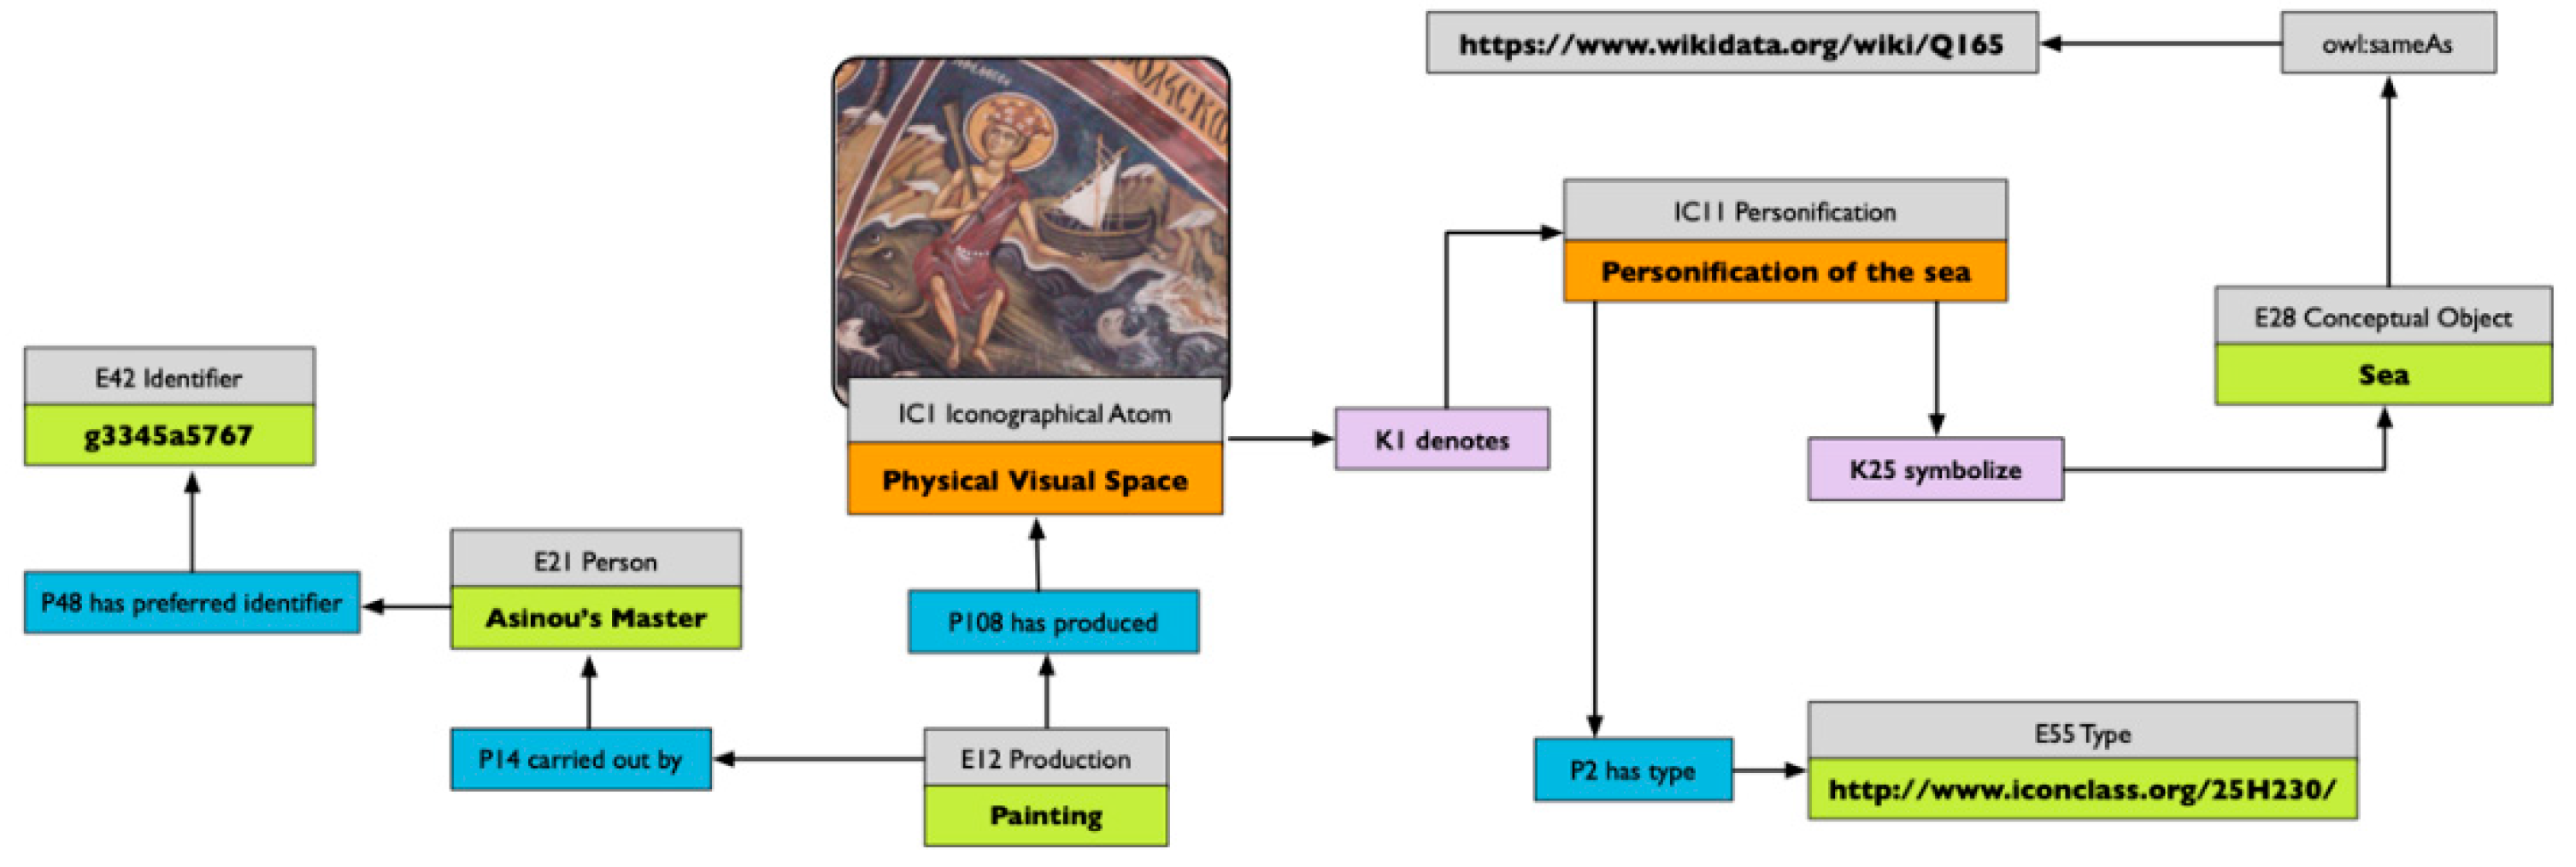 Heritage Free Full Text An Ontological Approach To The Description Of Visual And Iconographical Representations Html